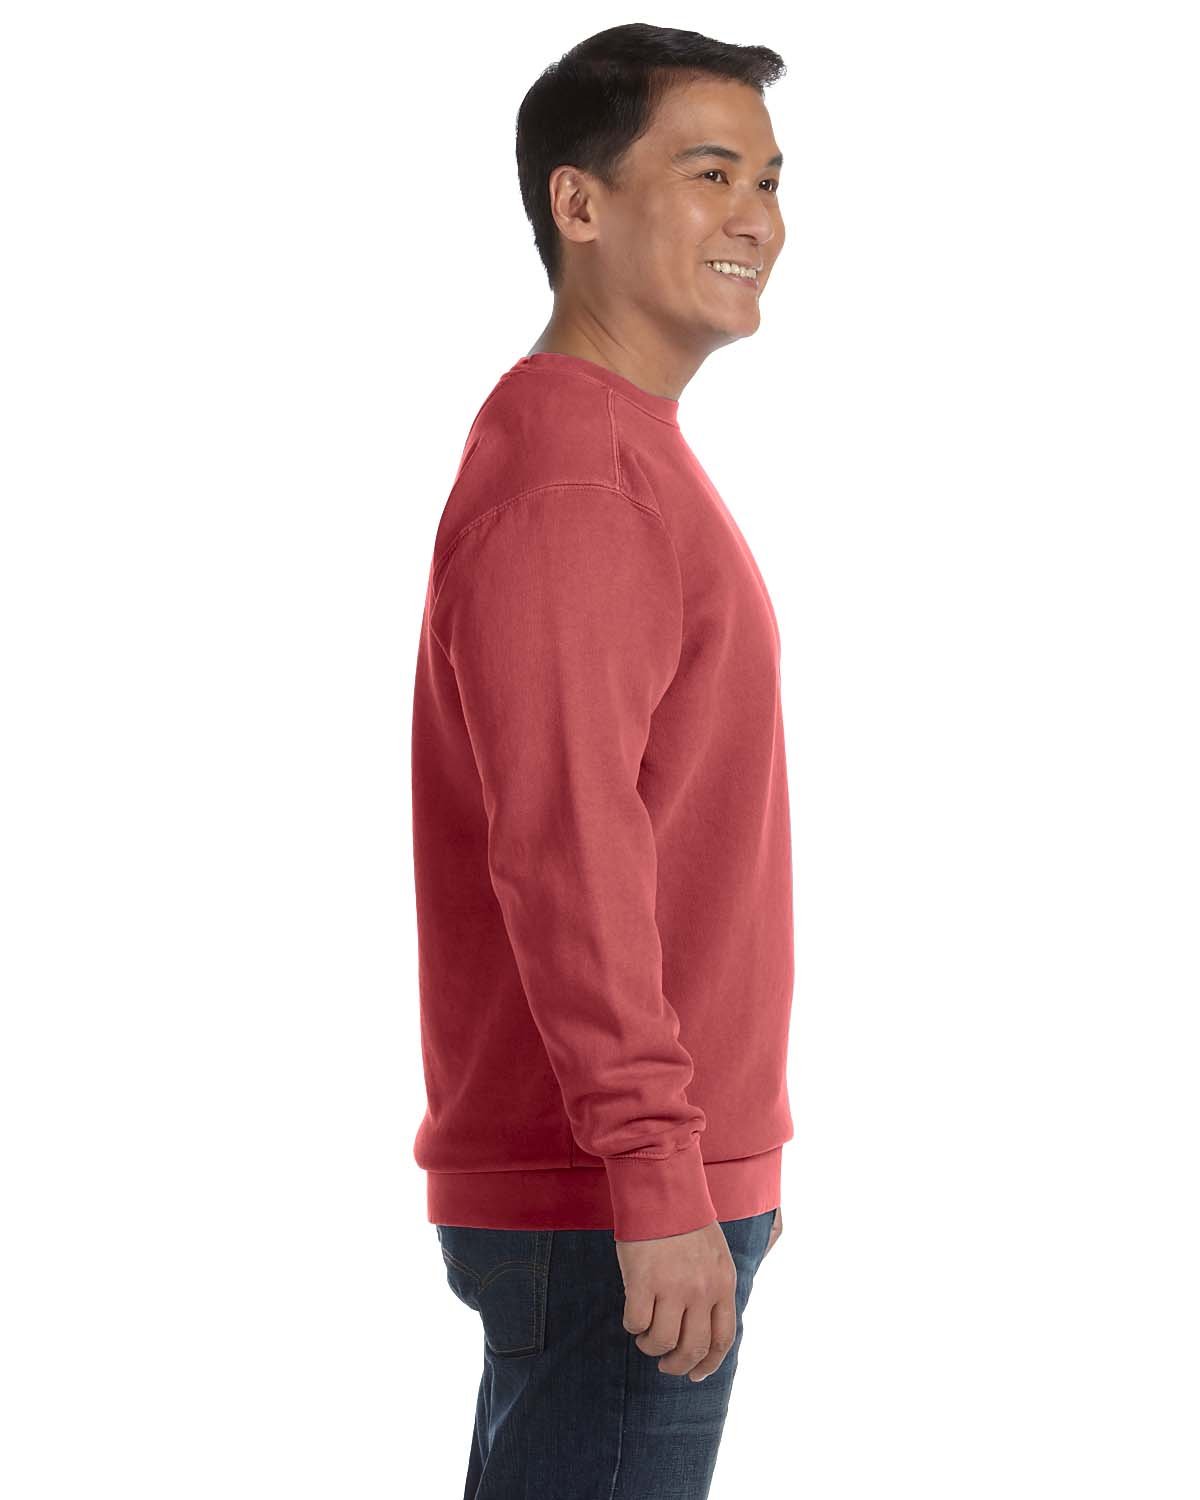 Stand Out in Comfort Colors Sweatshirts 